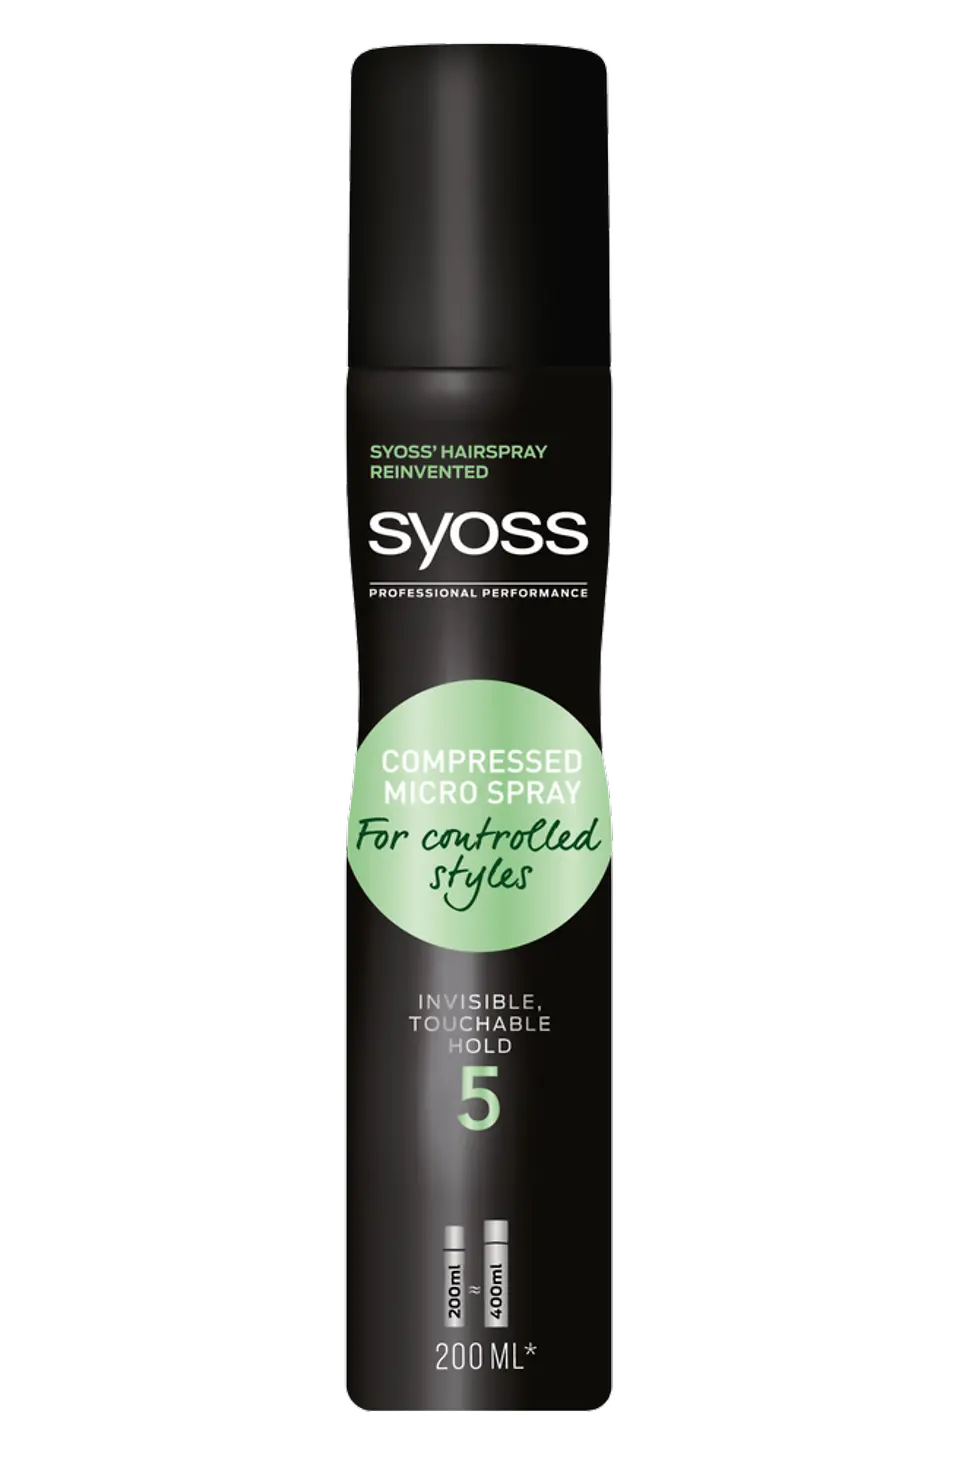 
Syoss Compressed Micro Spray
For strong styles